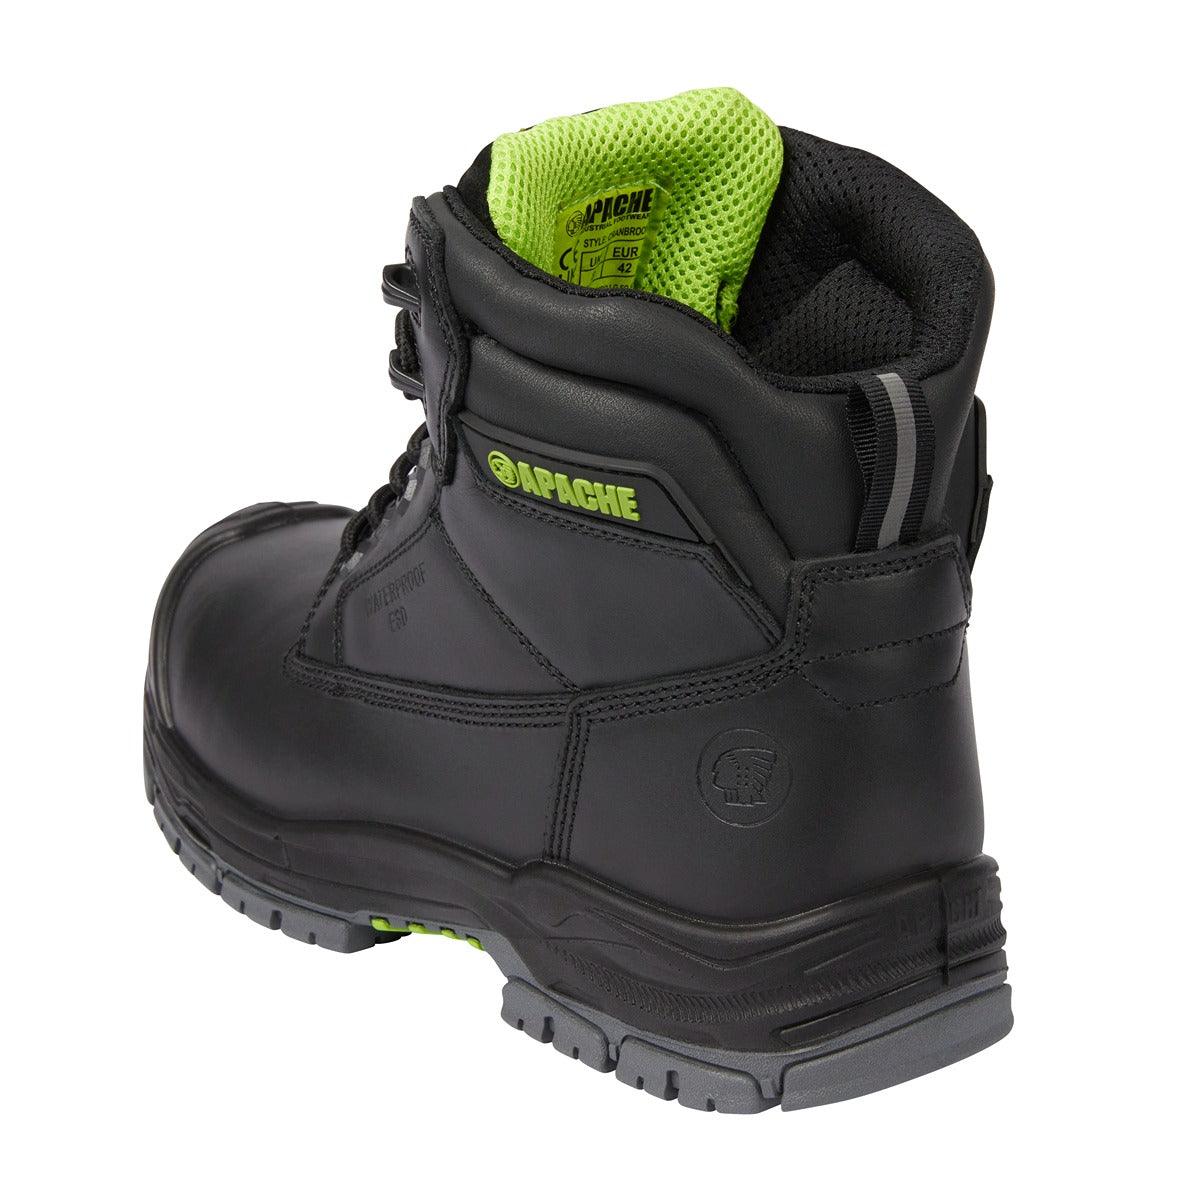 Apache Cranbrook Black Waterproof Esd Safety Boot - Gts Outsole 3